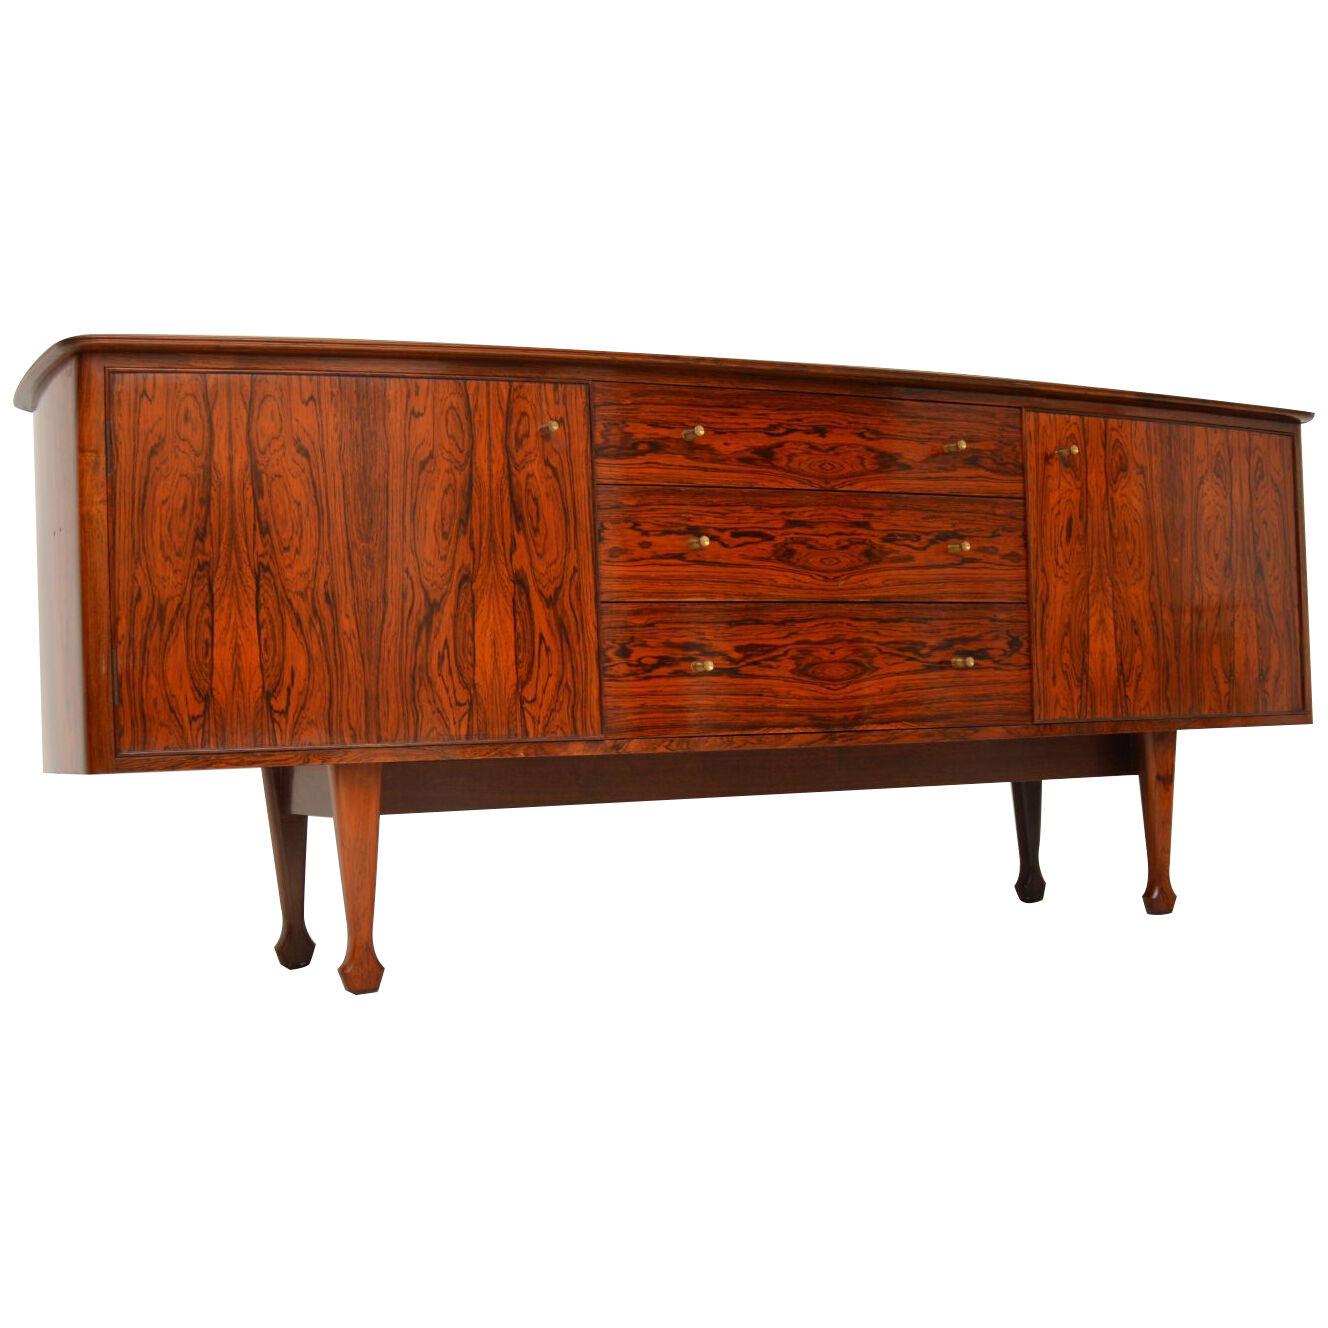 1950's Vintage Rosewood Sideboard by A.J Milne for Heal's